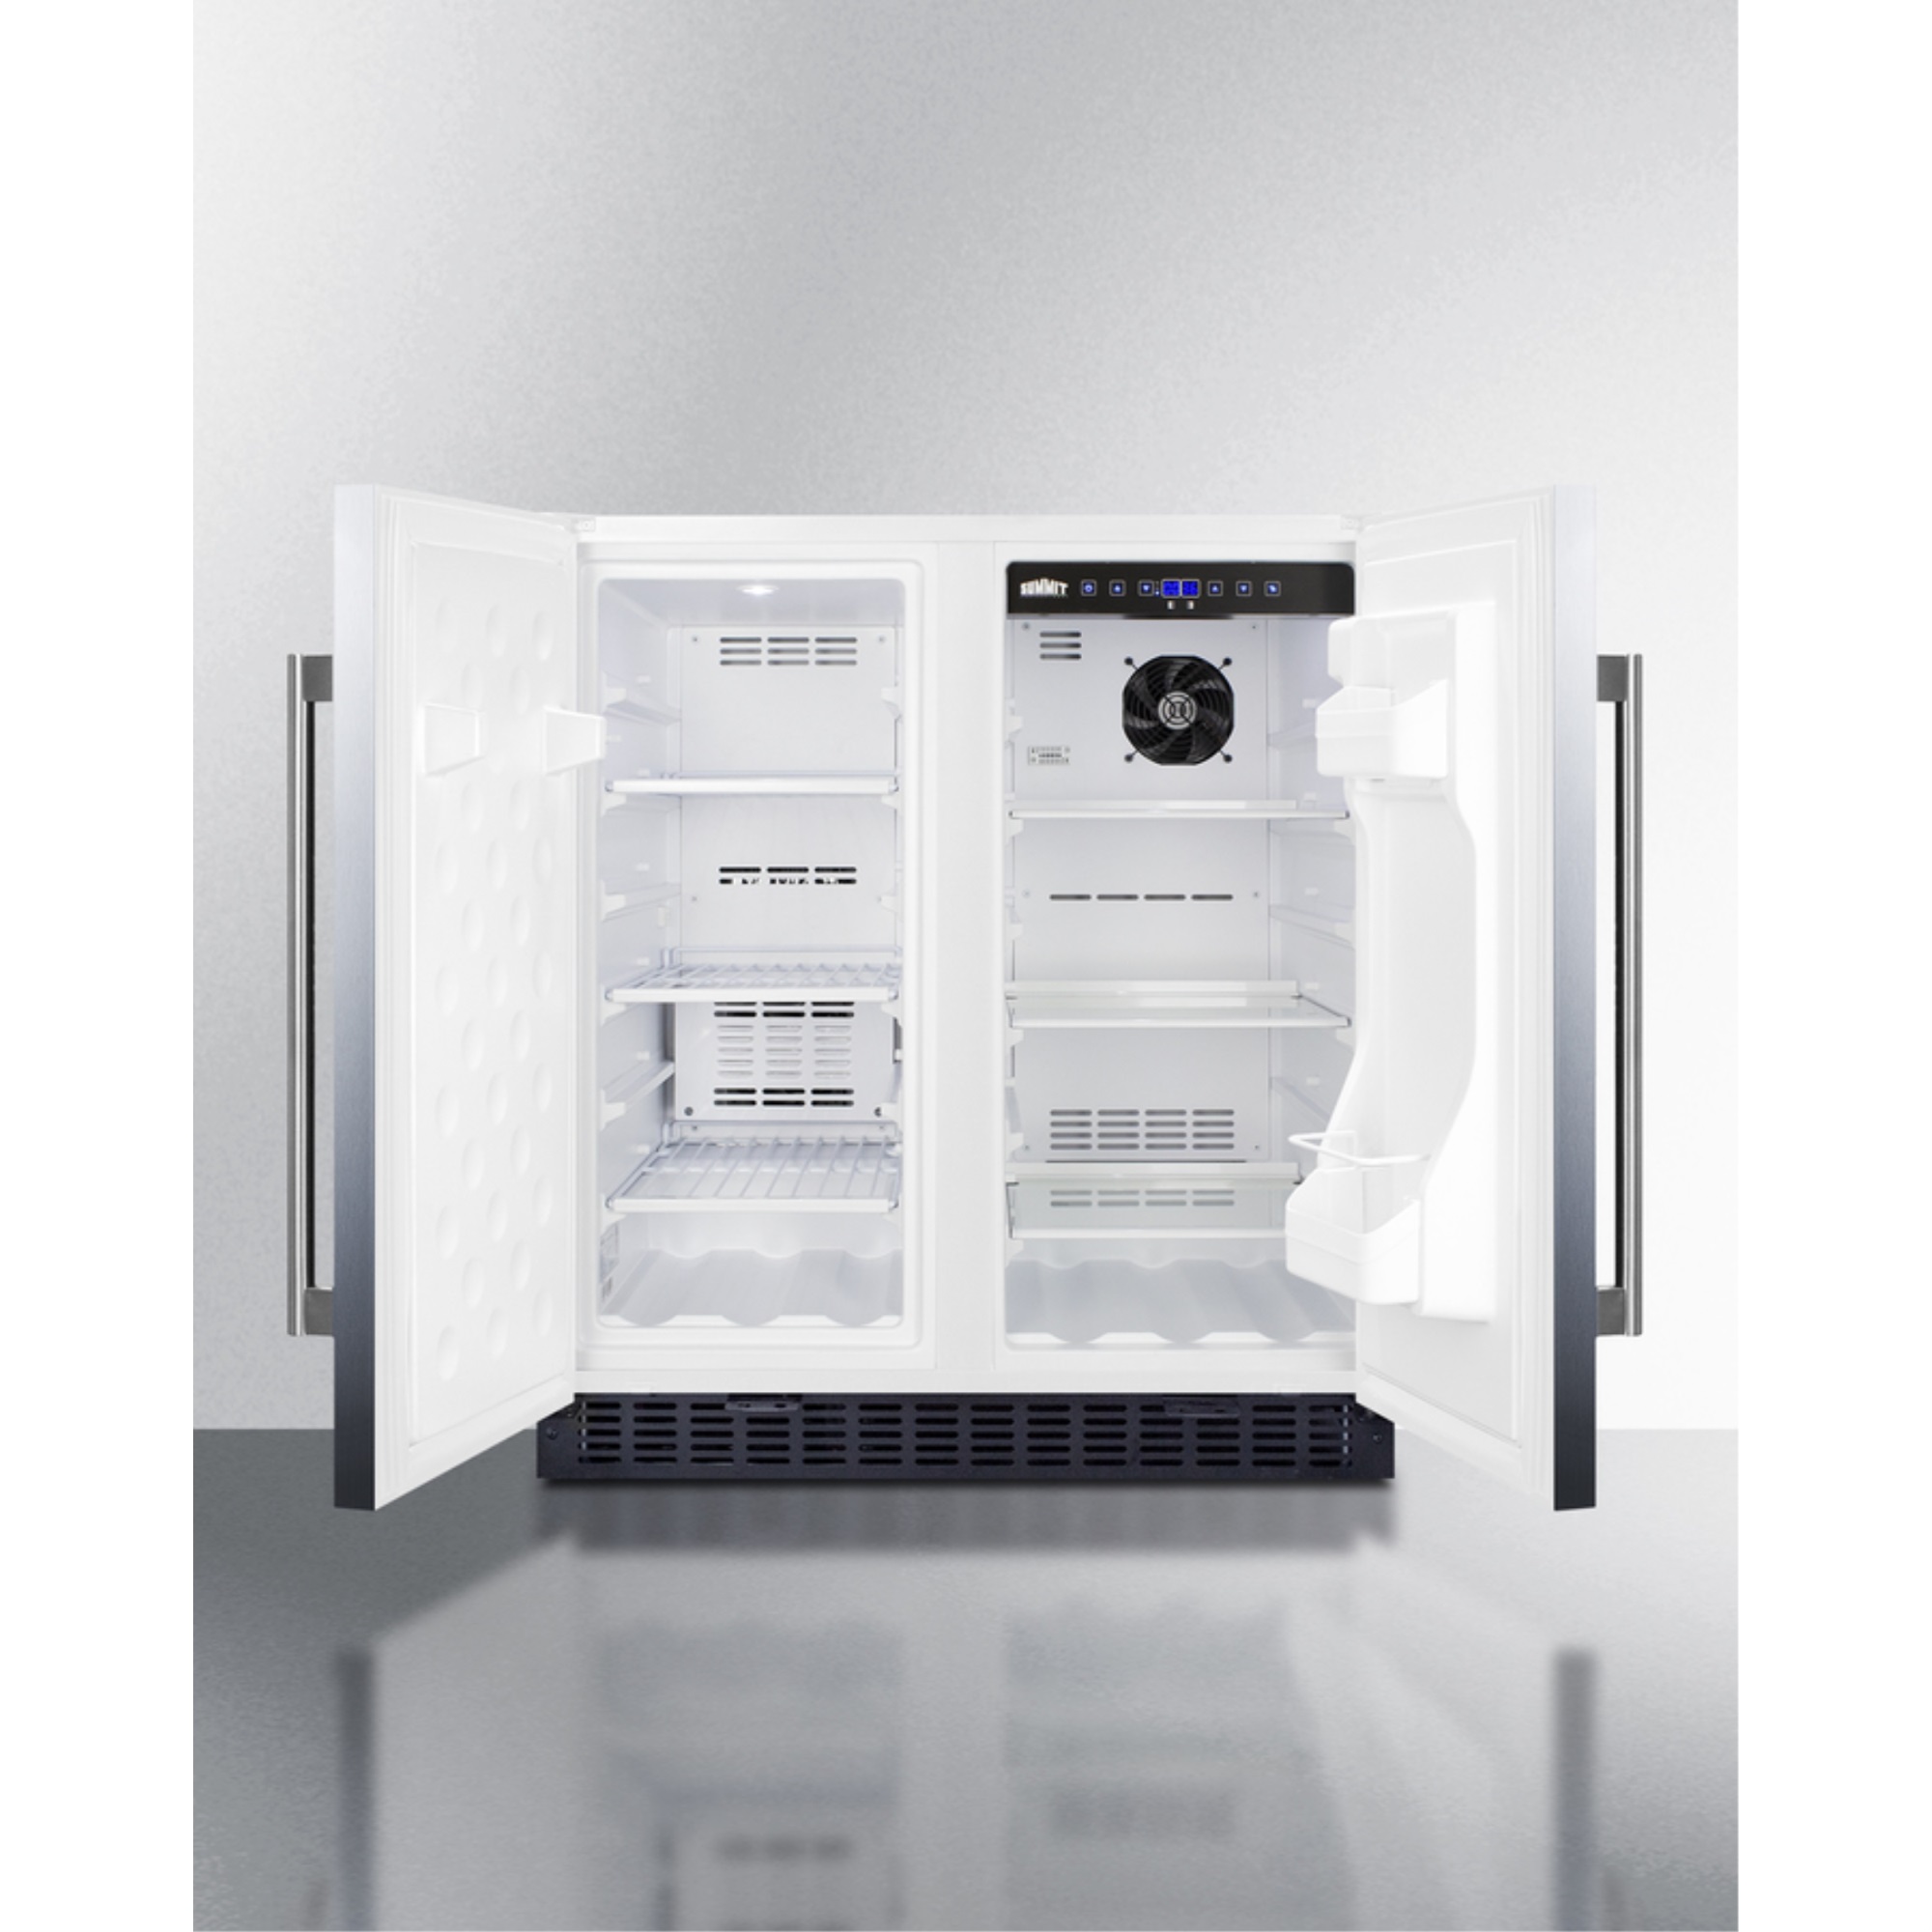 30" wide undercounter frost-free side-by-side refrigerator-freezer with stainless steel doors, white cabinet, locks, stainless steel handles, and digital controls - image 3 of 5